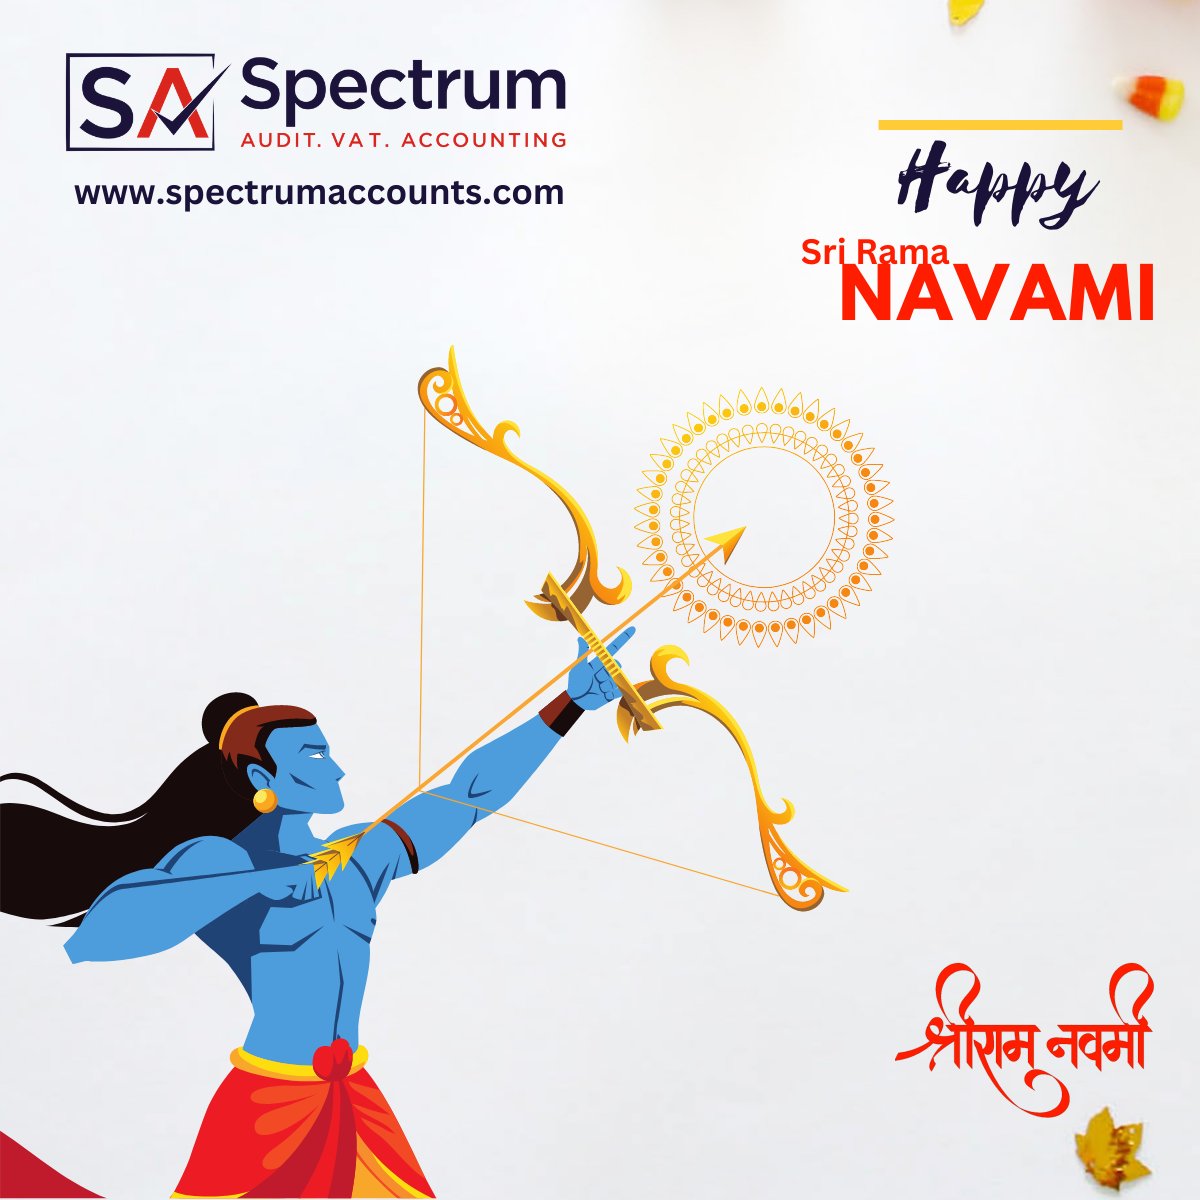 Festival greetings from Spectrum Auditing for all those celebrating Sri Rama Navami in India and across the world.

#festivalsofindia #indianculture #indianholidays #festival #india #indians #uae #dubai #culture #hindu